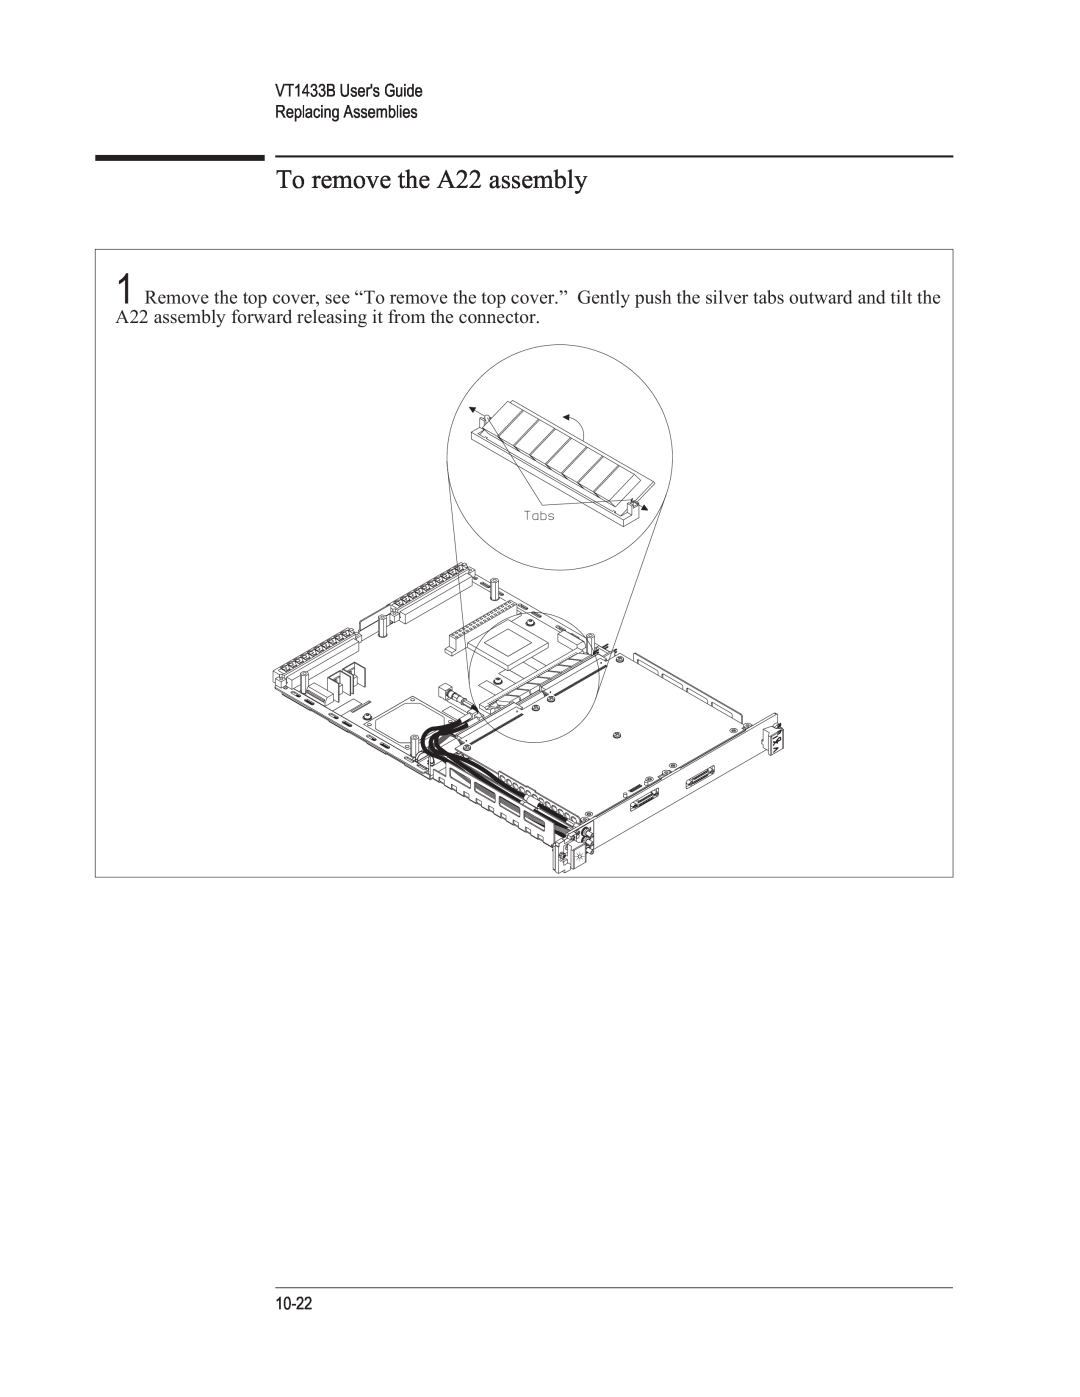 VXI manual To remove the A22 assembly, VT1433B Users Guide Replacing Assemblies, 10-22 